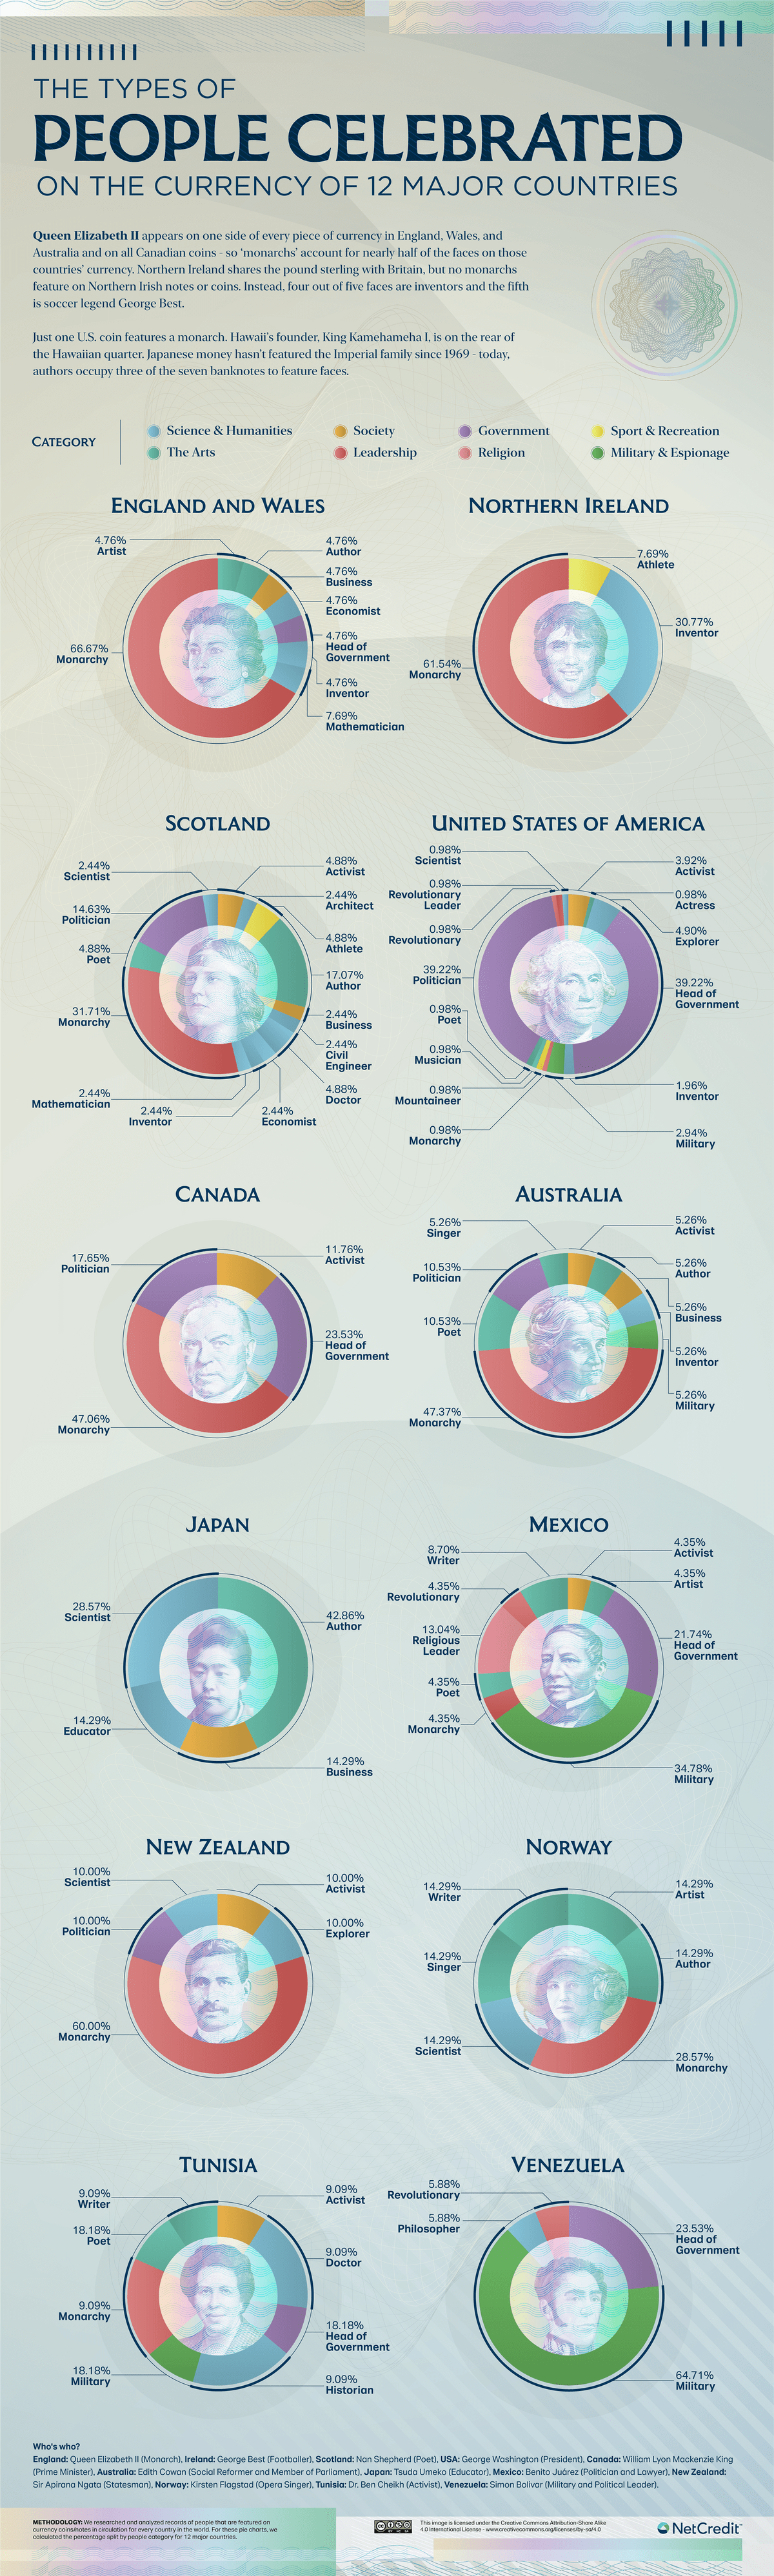 The Types of People Celebrated On Currency - Infographic